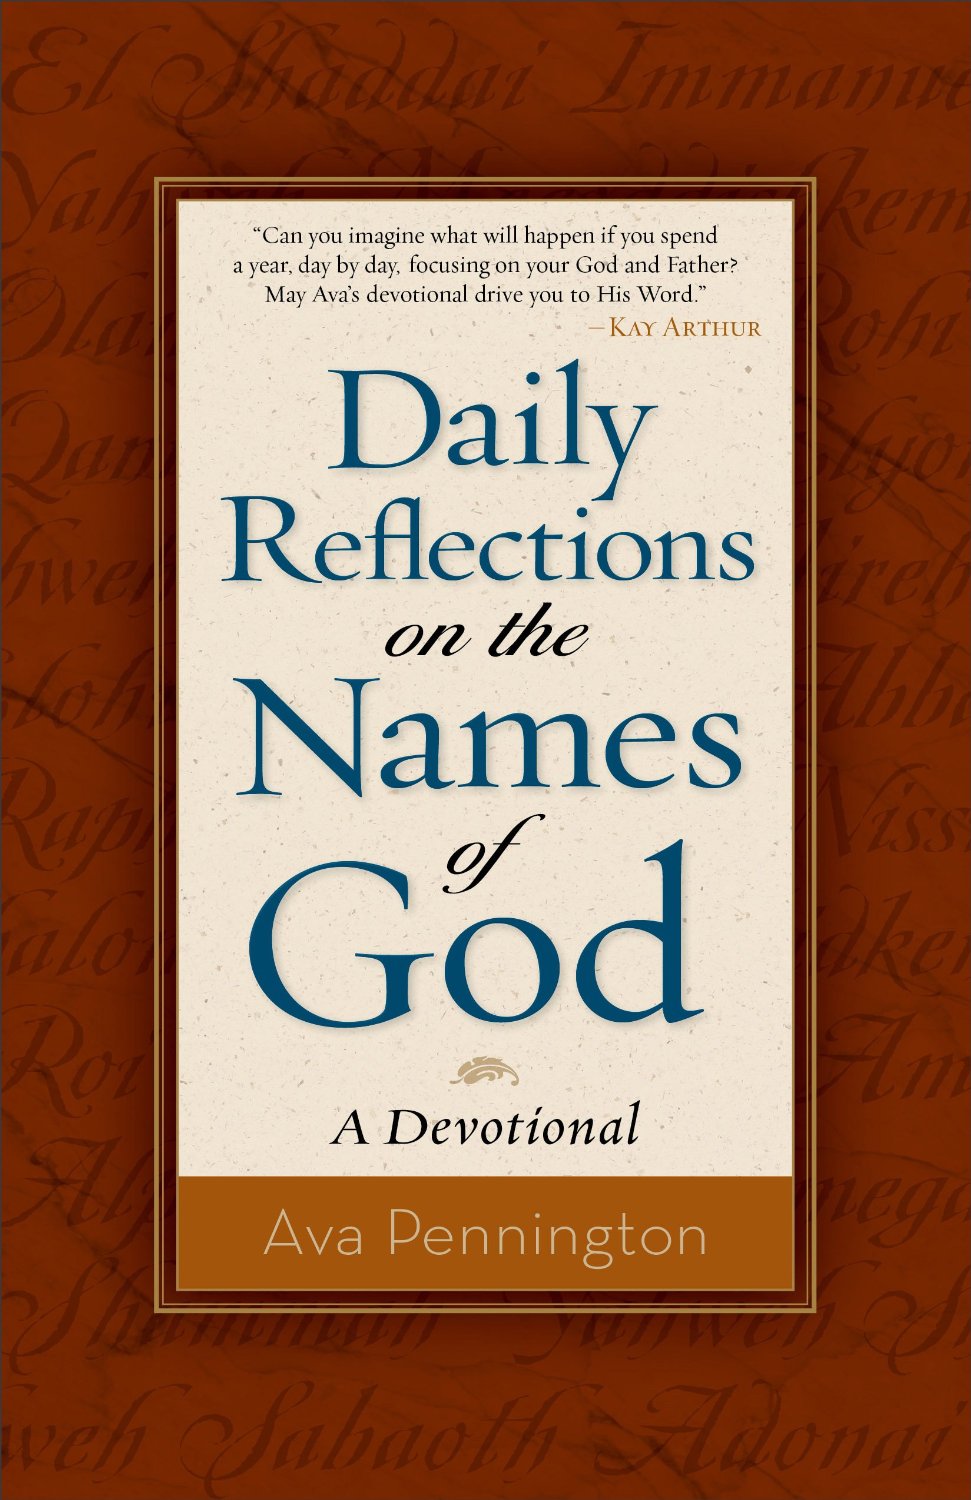 Video of the Week: Daily Reflections on the Names of God by Ava Pennington